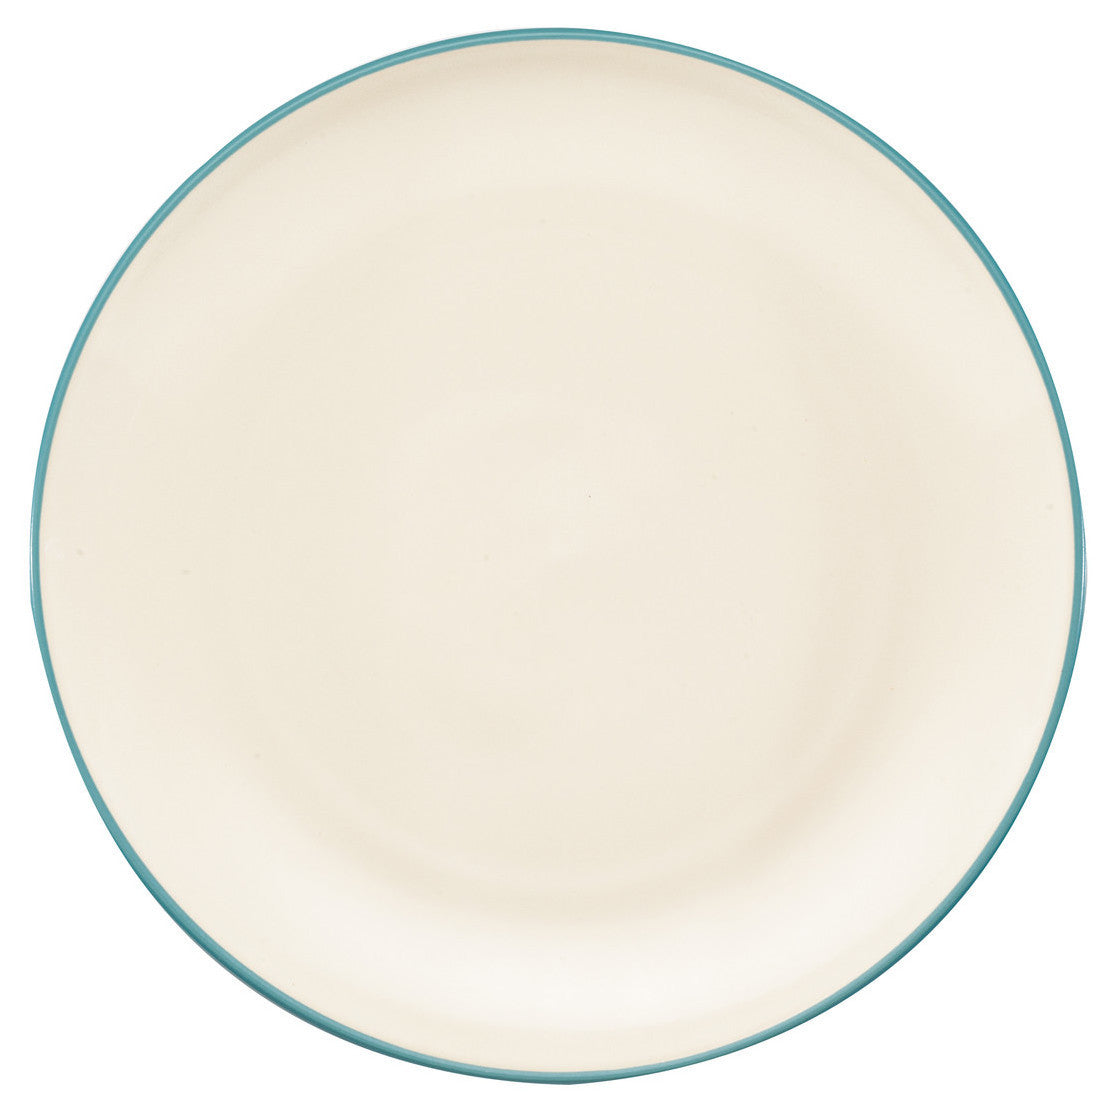 16 Piece Colorwave Turquoise Coupe Dinner Set